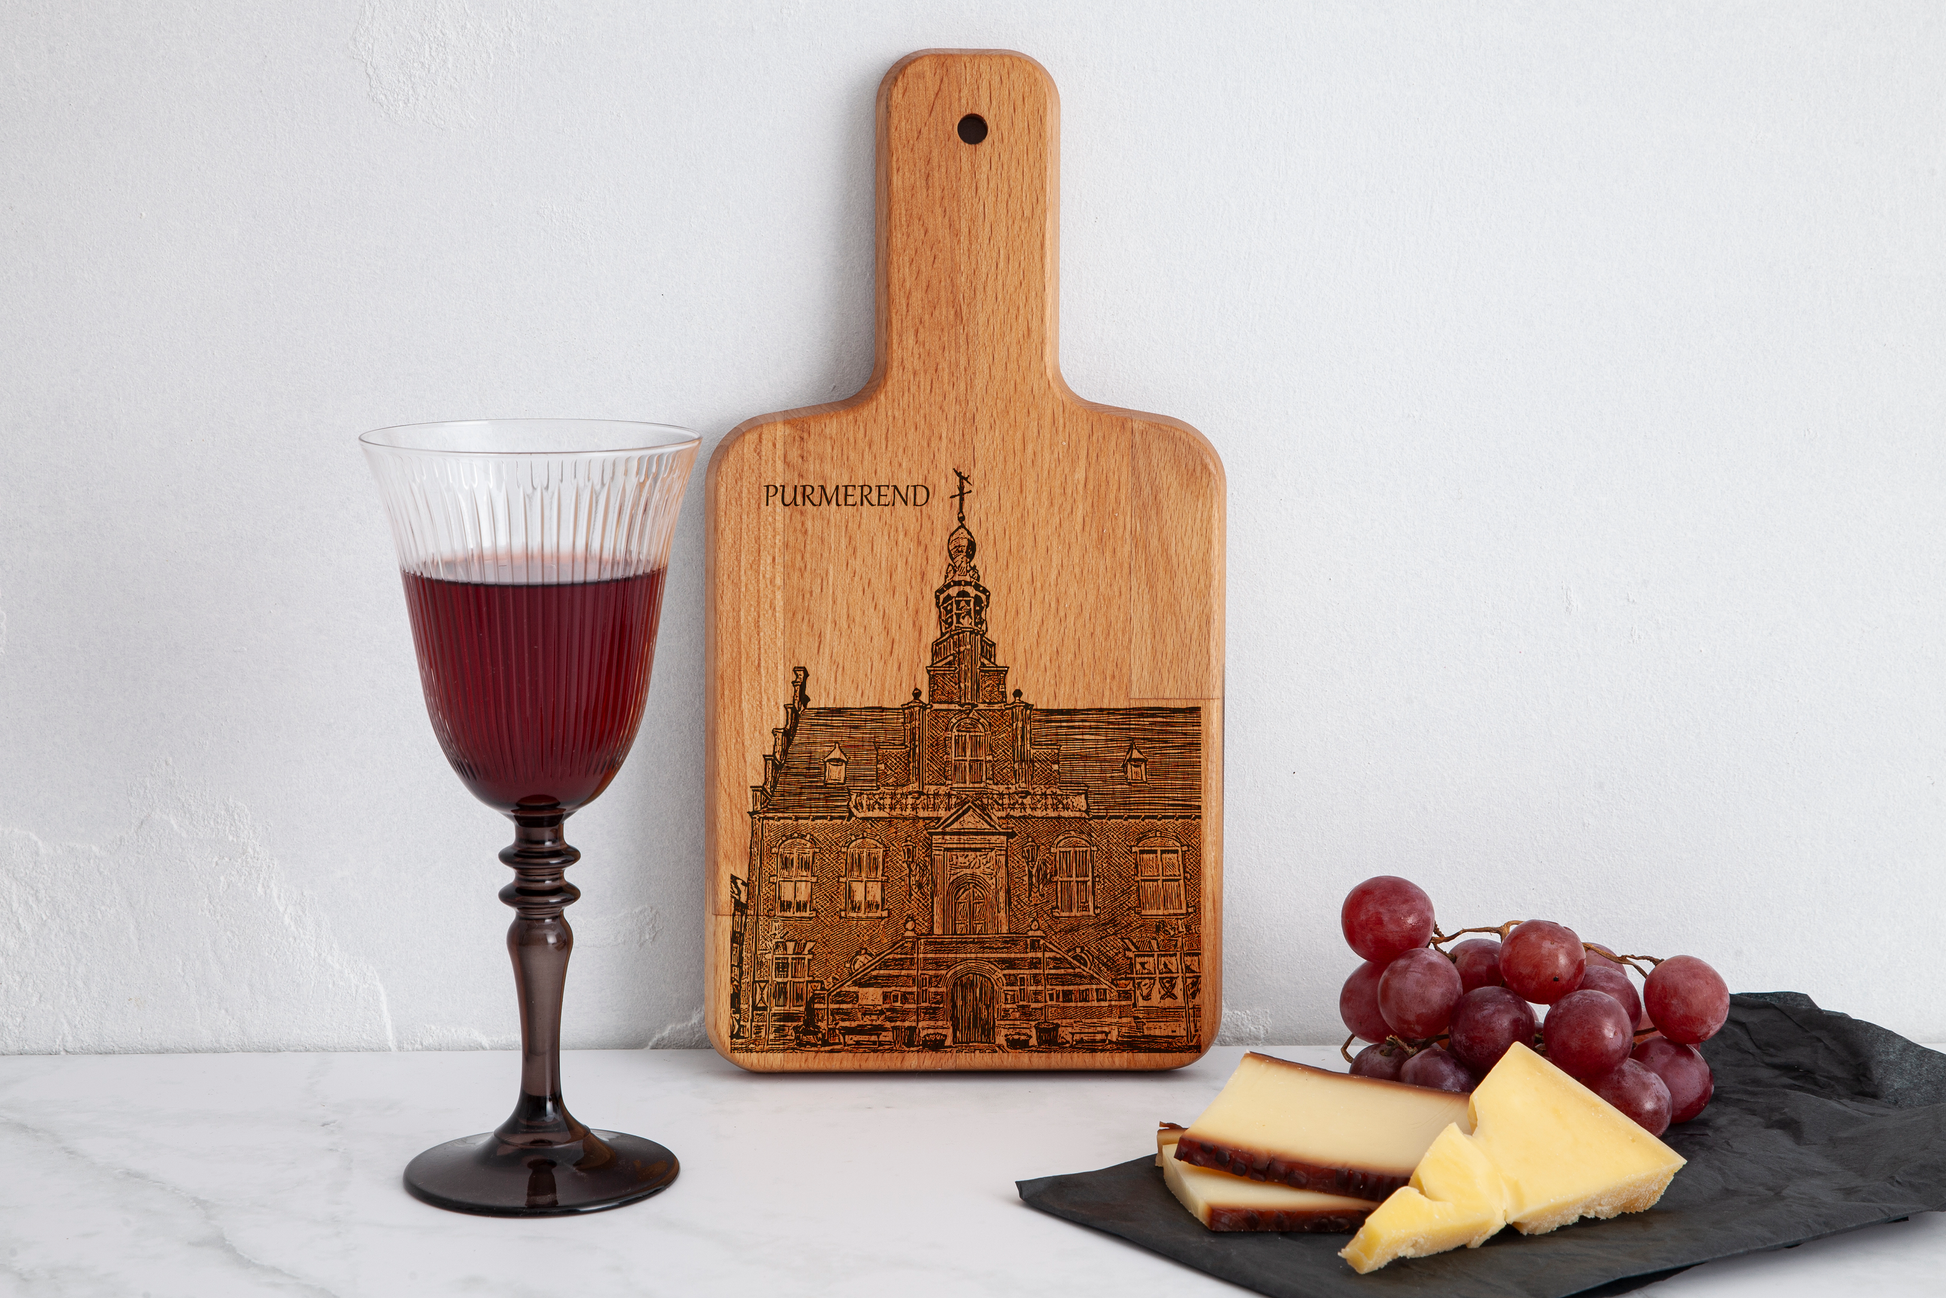 Purmerend, Stadhuis, cheese board, in kitchen